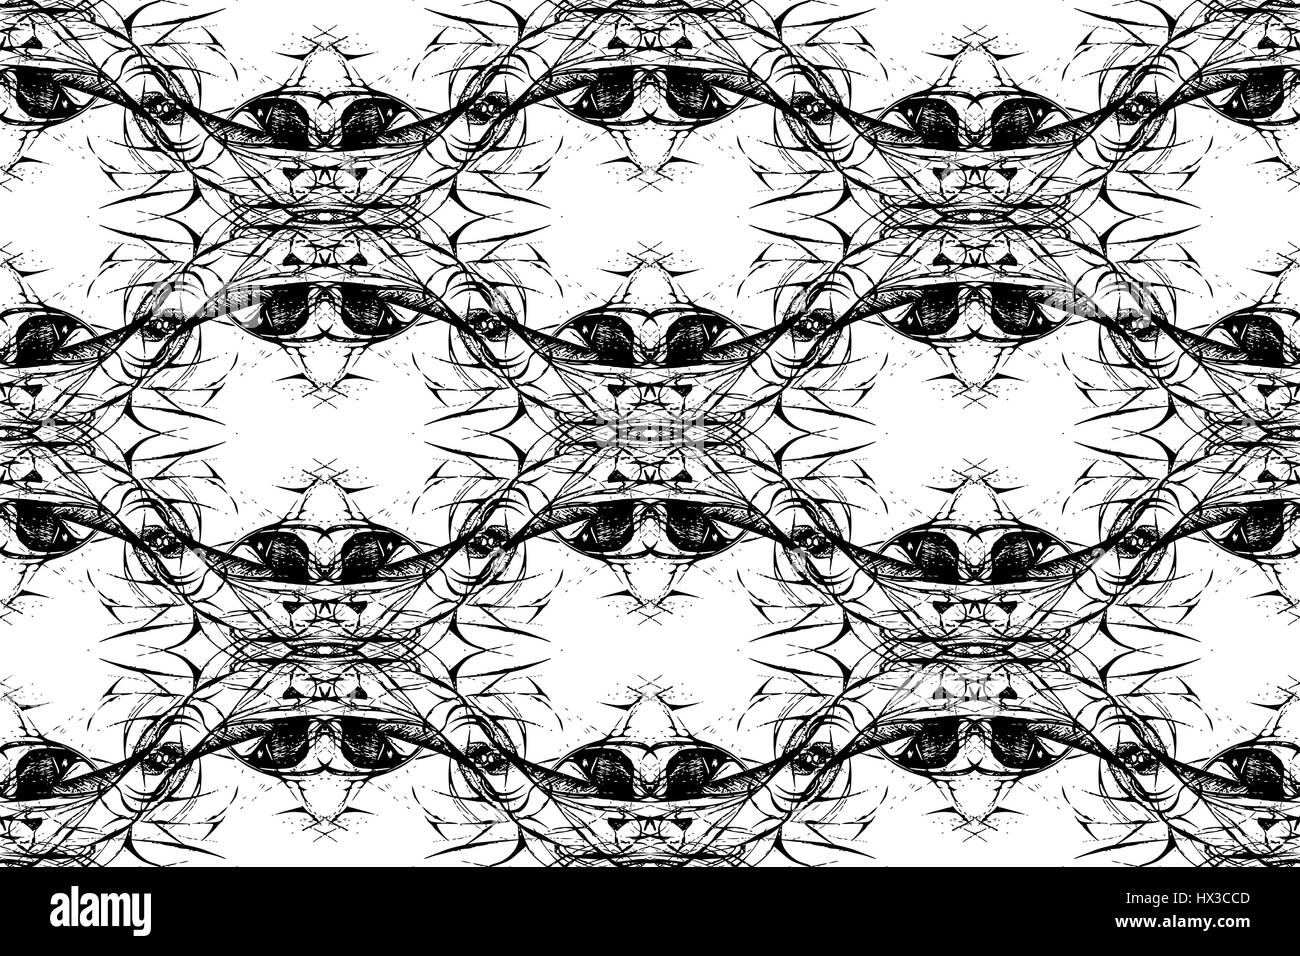 Seamless grungy kaleidoscope pattern. Hand drawn curly shapes, diagonal layout, black outlines on white background. Conceptual texture. Textile print. Stock Vector